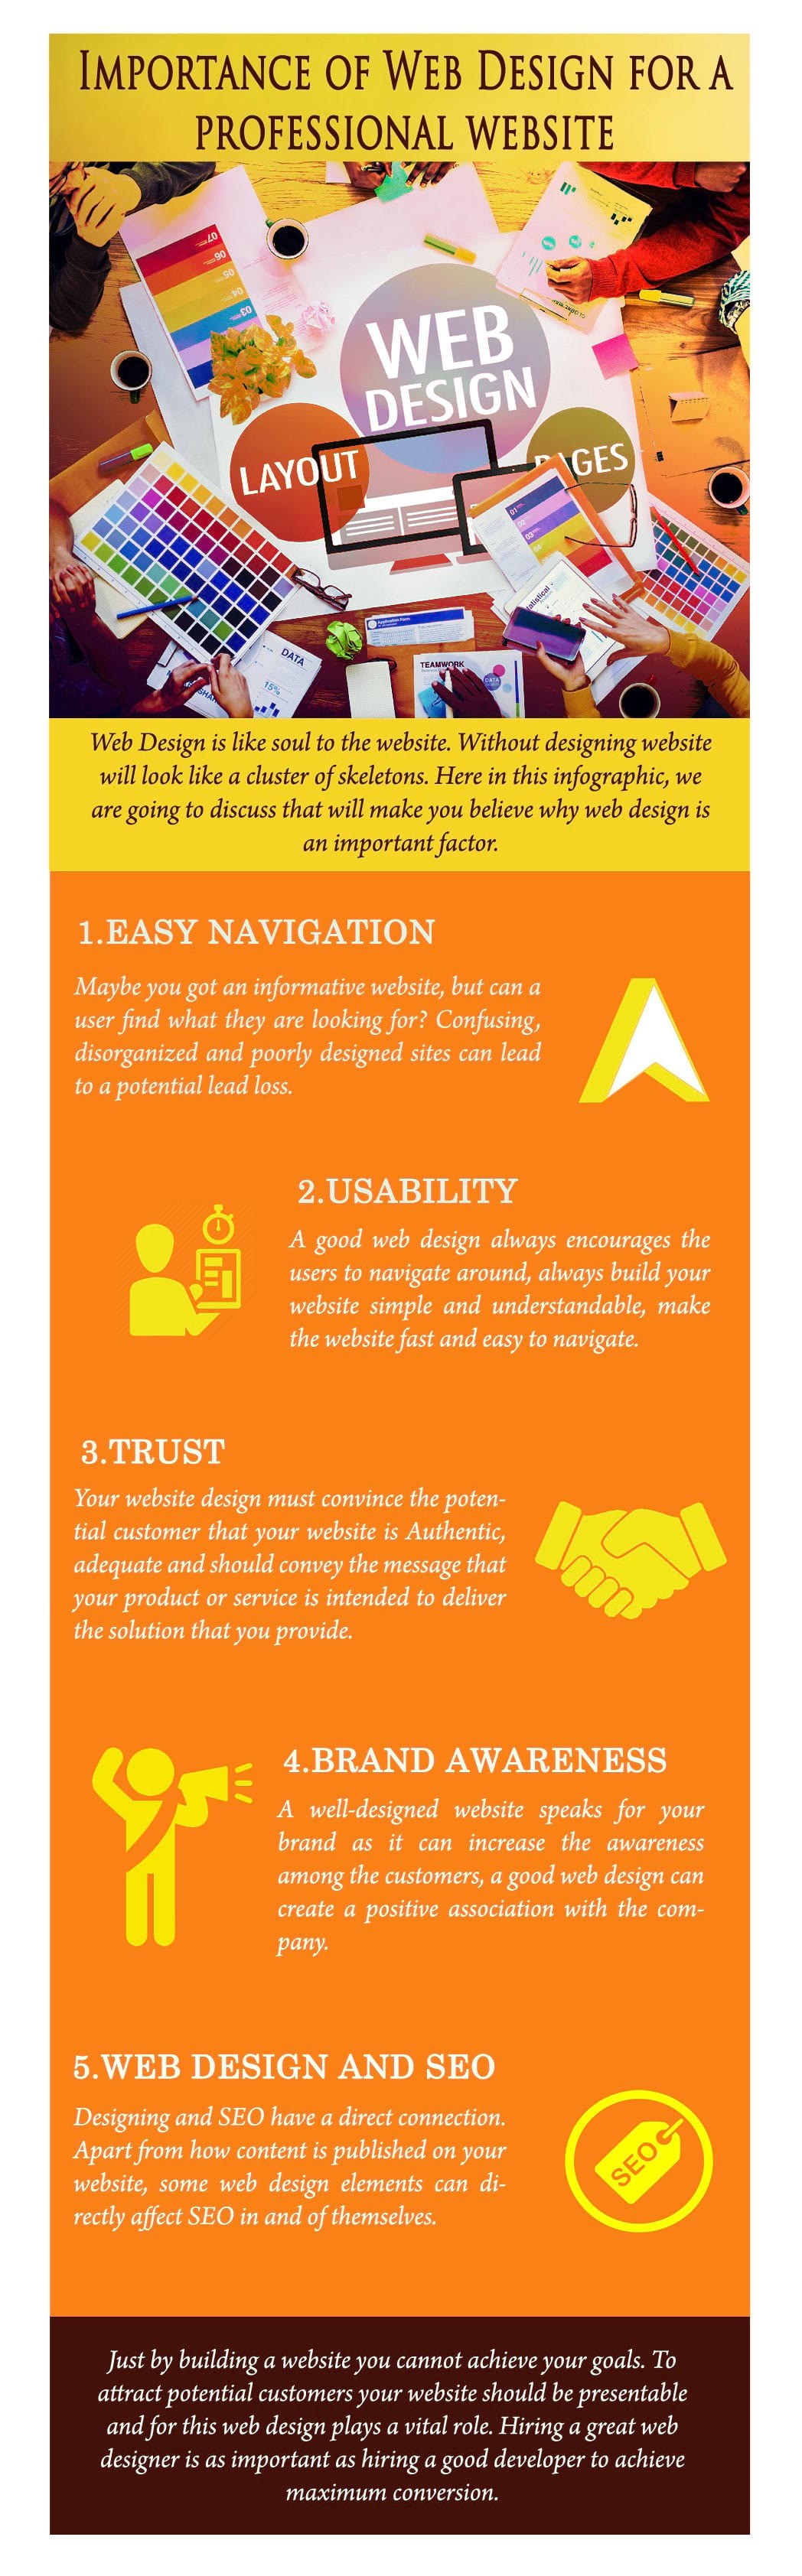 The Importance Of Web Design For A Professional Website Infographic